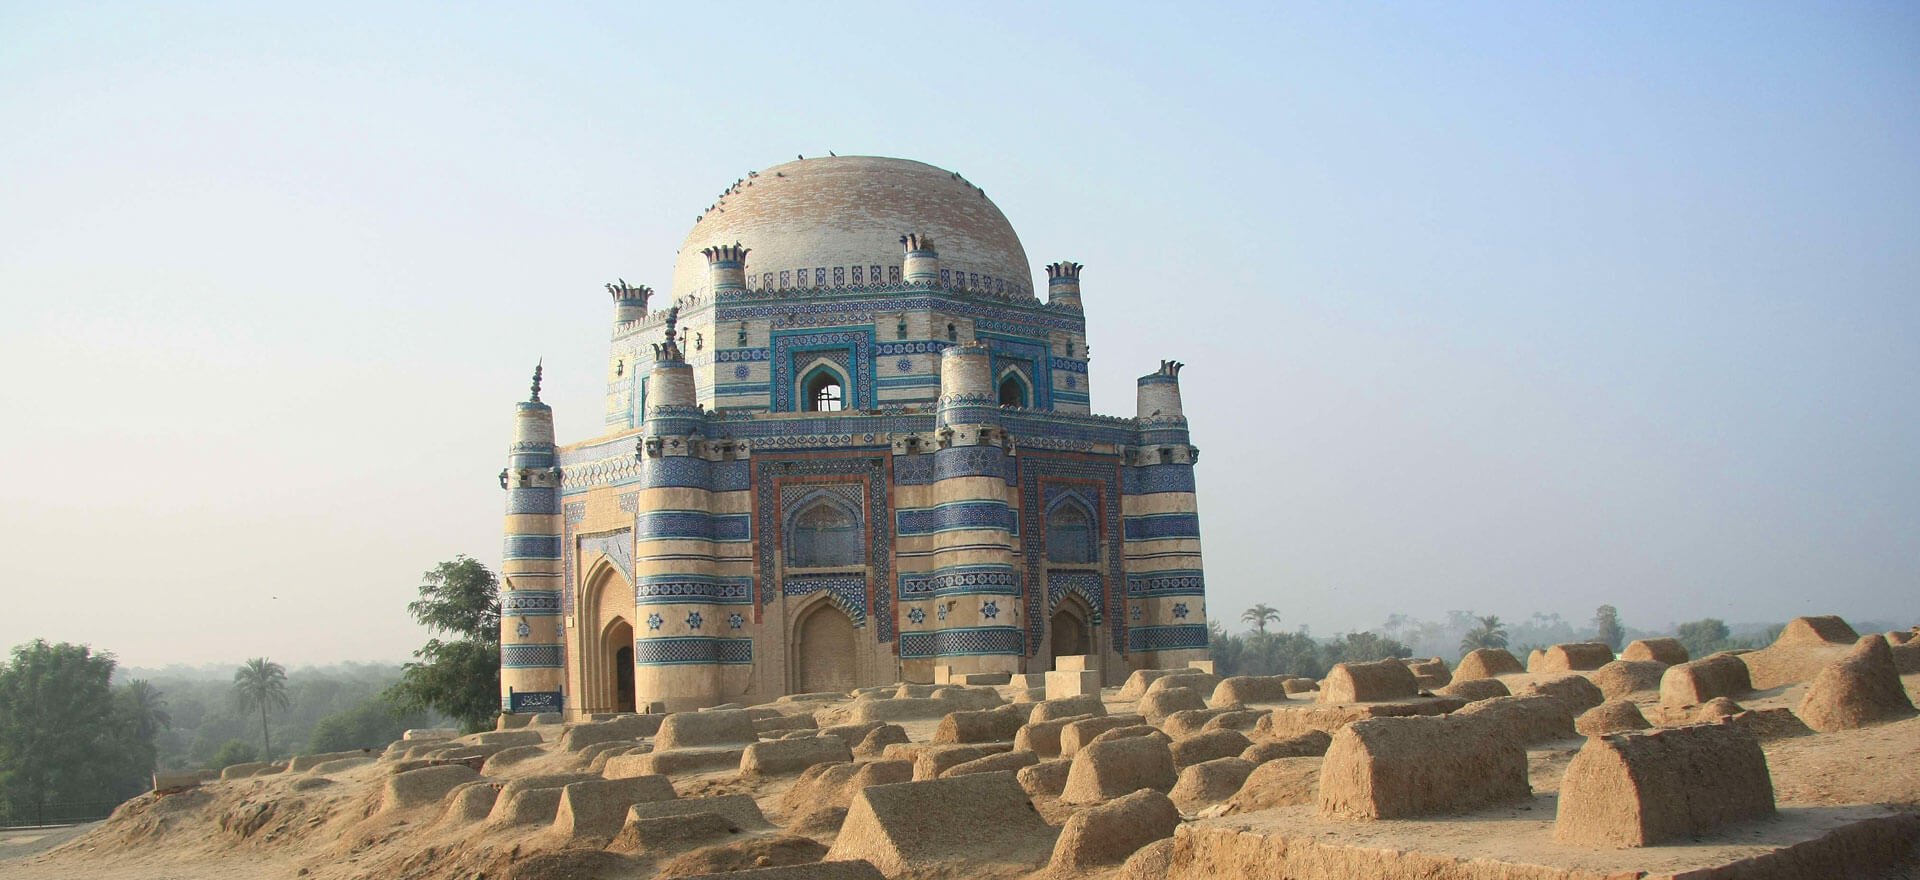 Ruined tombs at Uch Sharif - Pakistan Holidays and tours